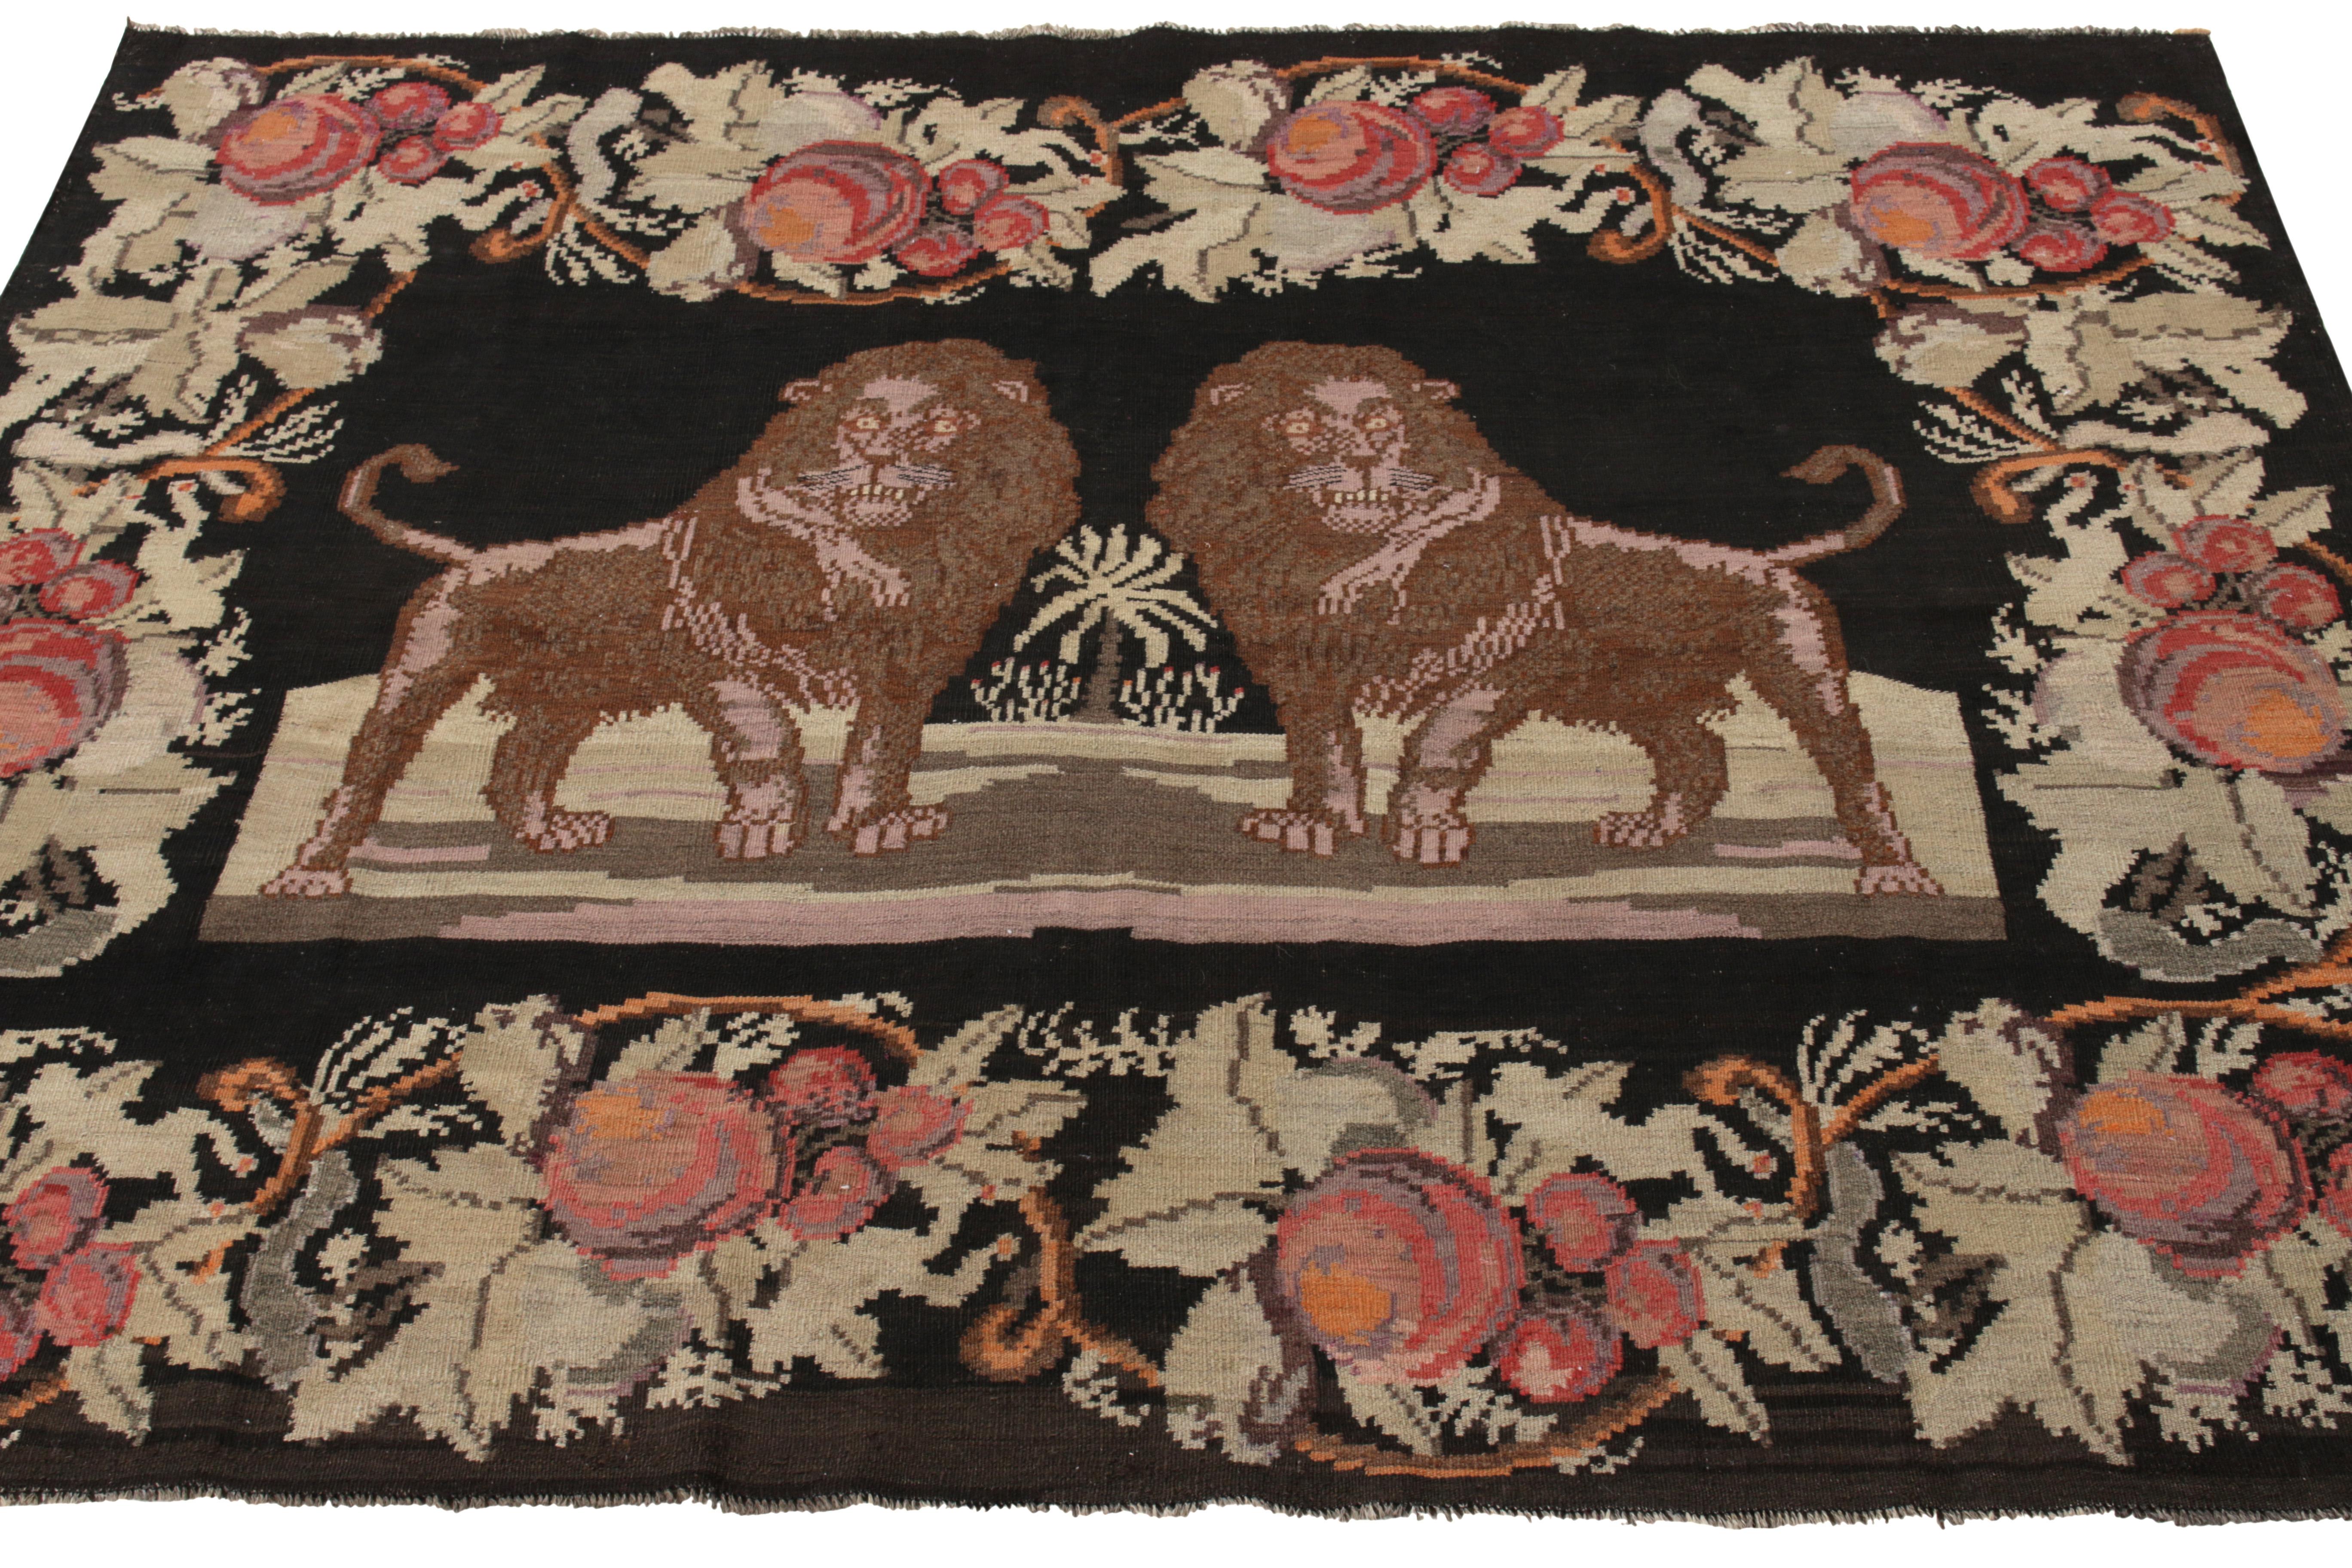 Bearing Classic aesthetics from Turkey circa 1950-1960, this 5 x 6 vintage Kilim rug relishes the finesse of Moldovian craftsmanship with Bessarabian influences. Featuring rare pictorial representation of lions with a traditional Art Nouveau floral